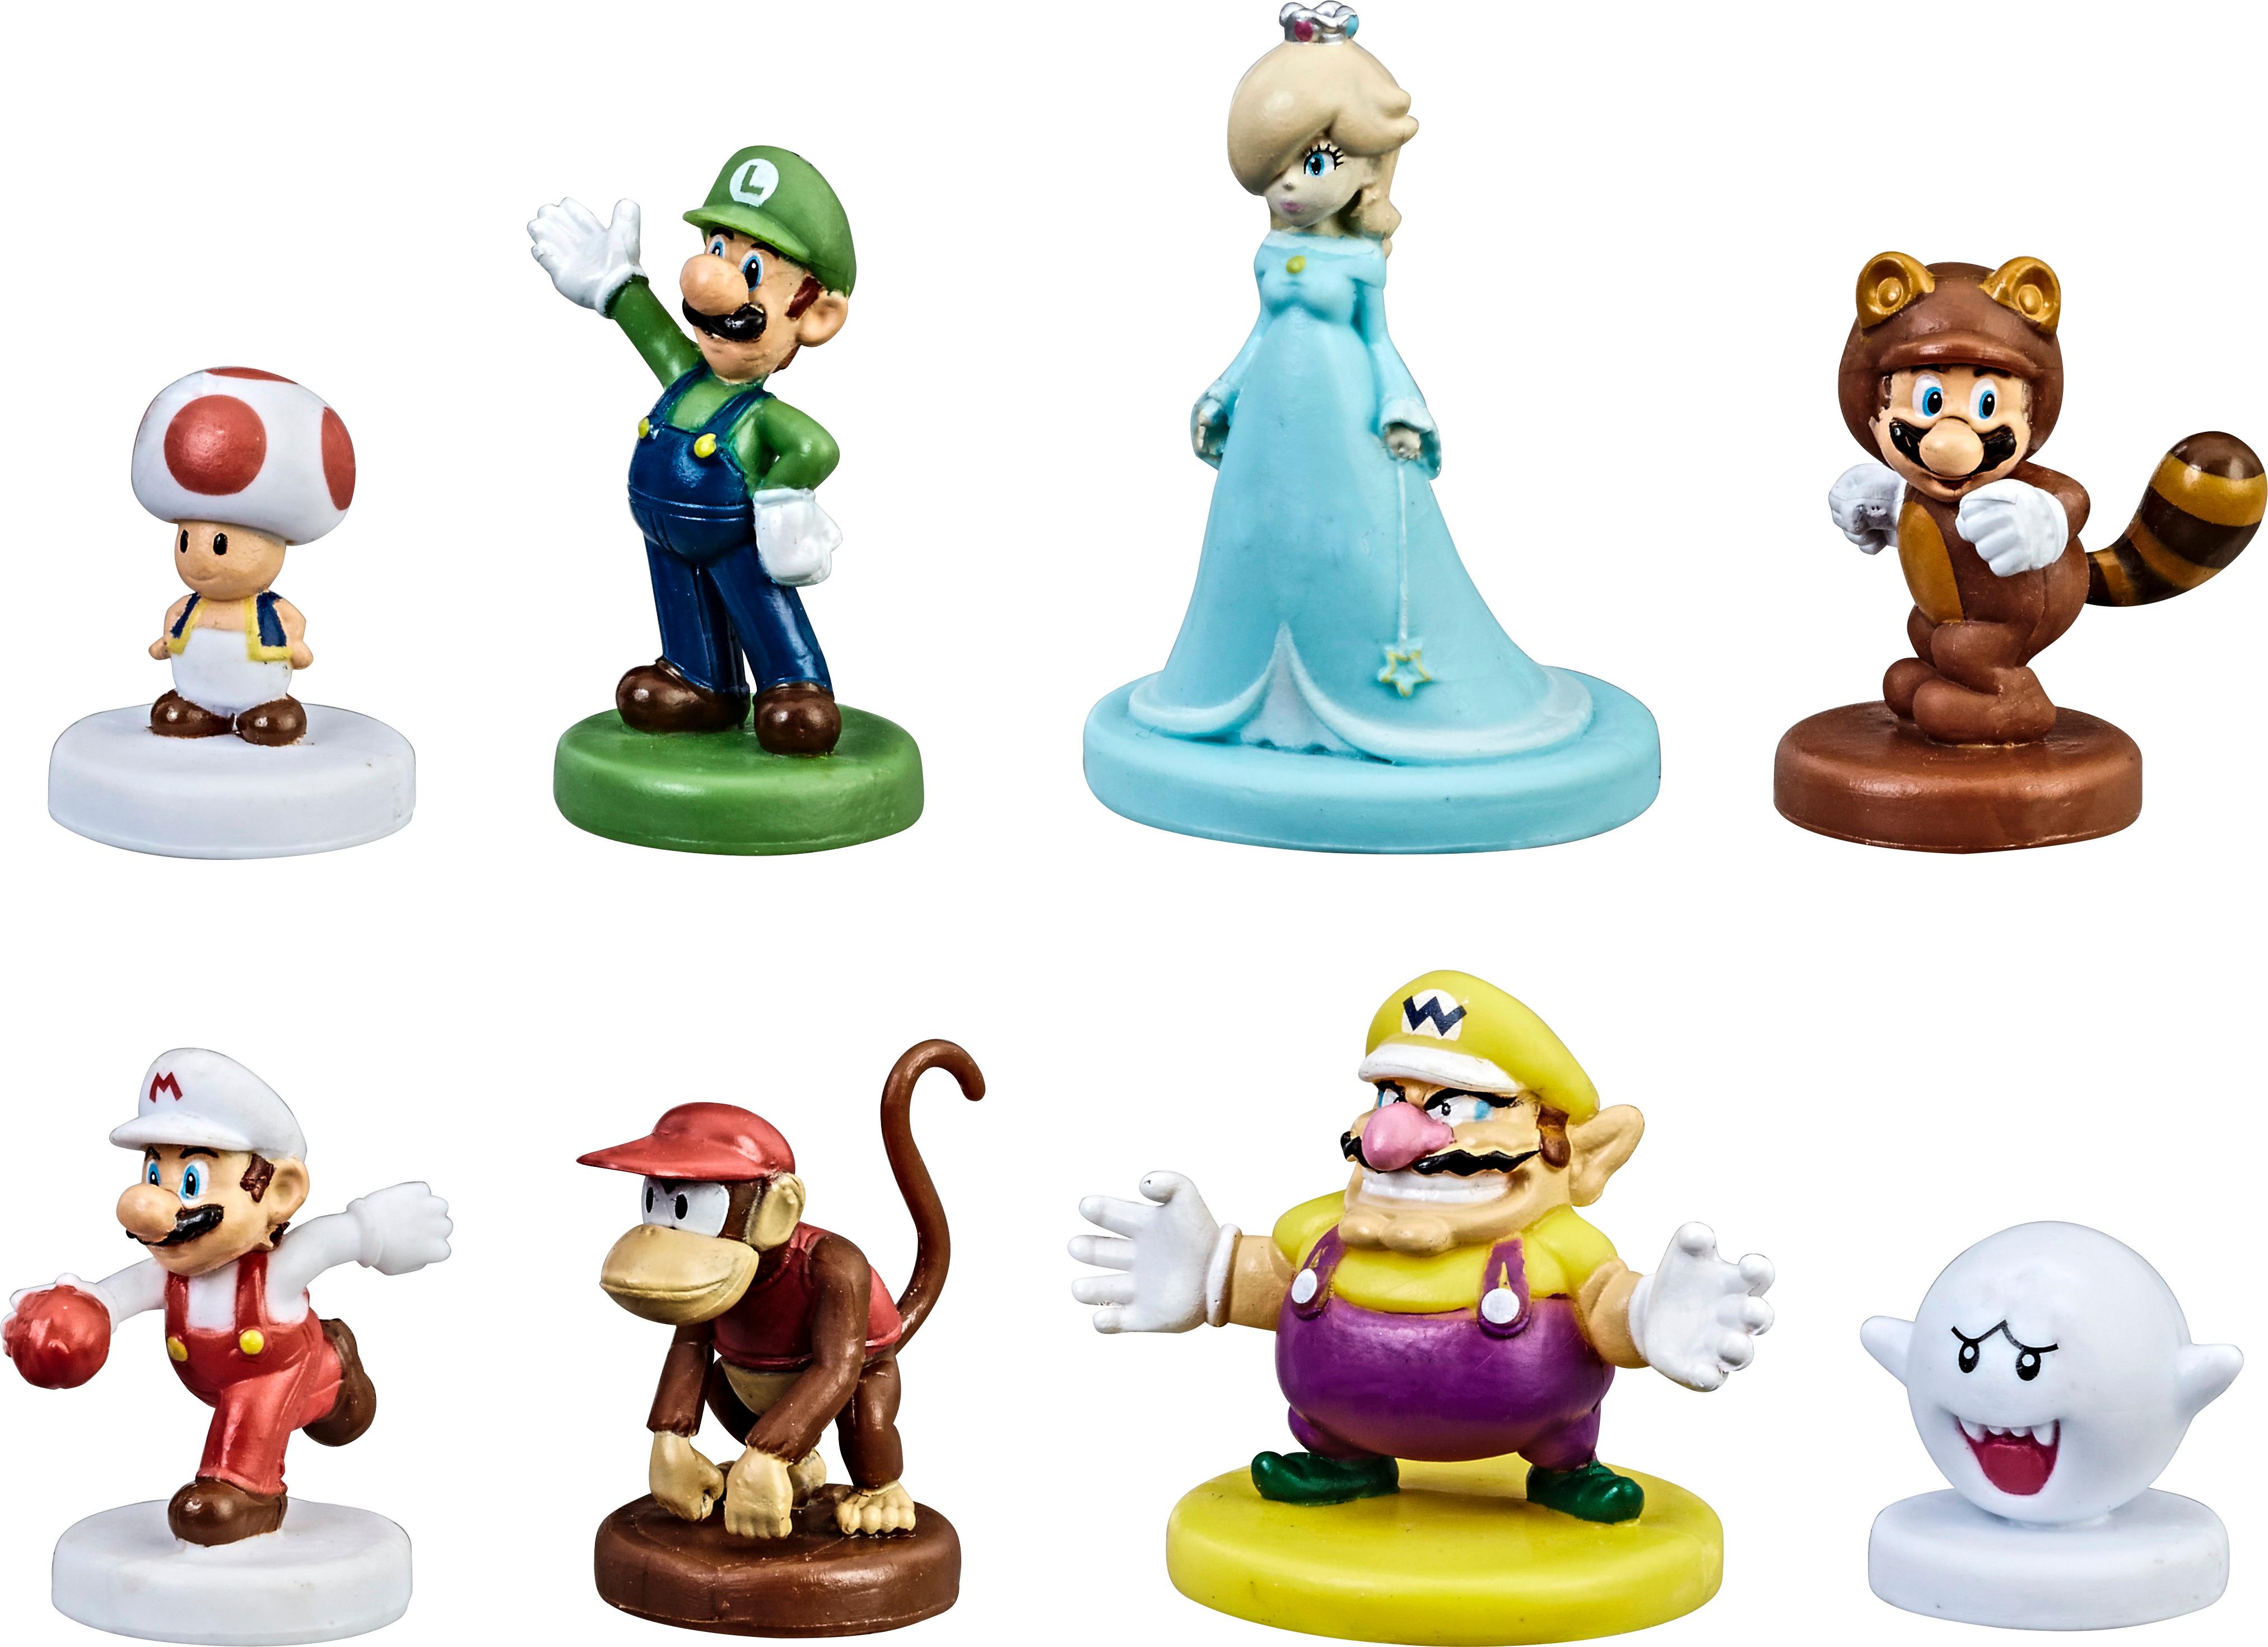 NEW Monopoly Gamer Power Packs Fire Mario and Toad Board Game Figures 